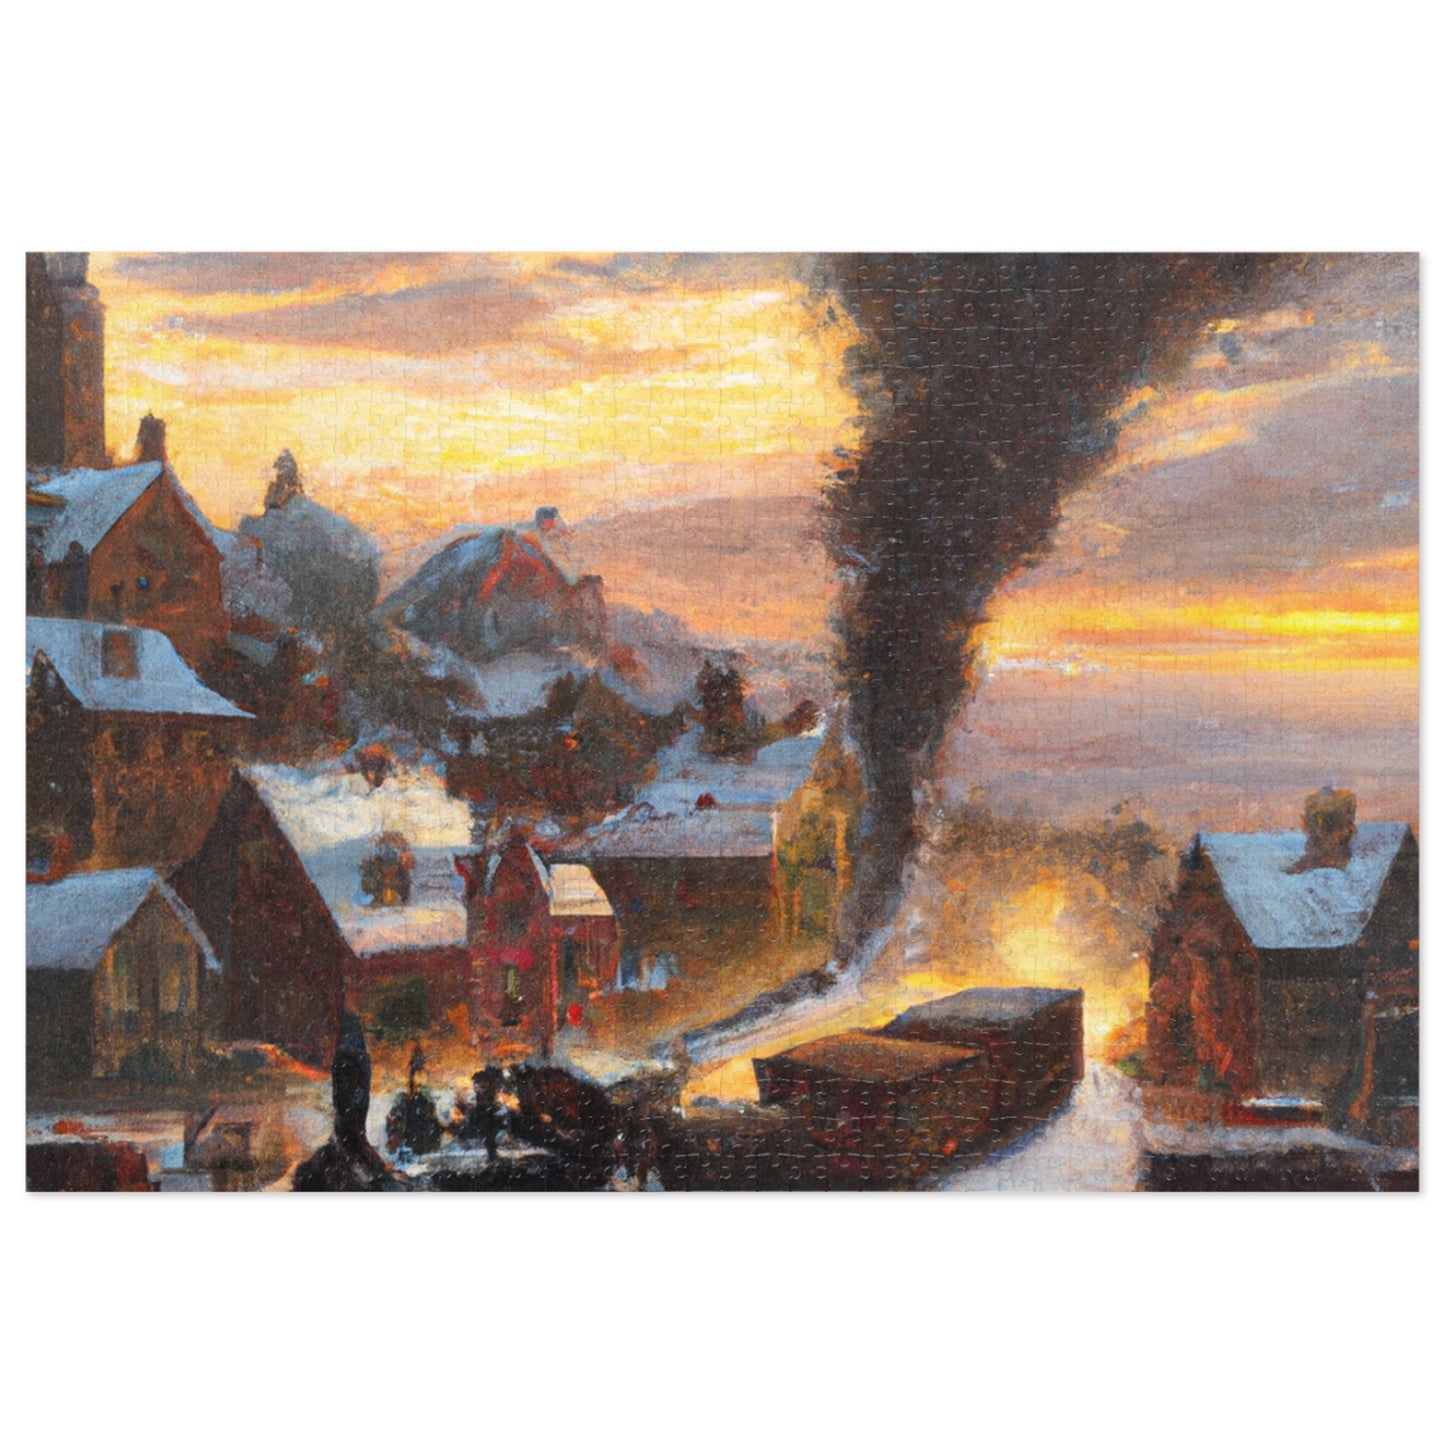 Vintage Christmas Village - JigSaw Puzzle 1000 Piece: William Winterscale - Christmas Gift | Holiday Scenes